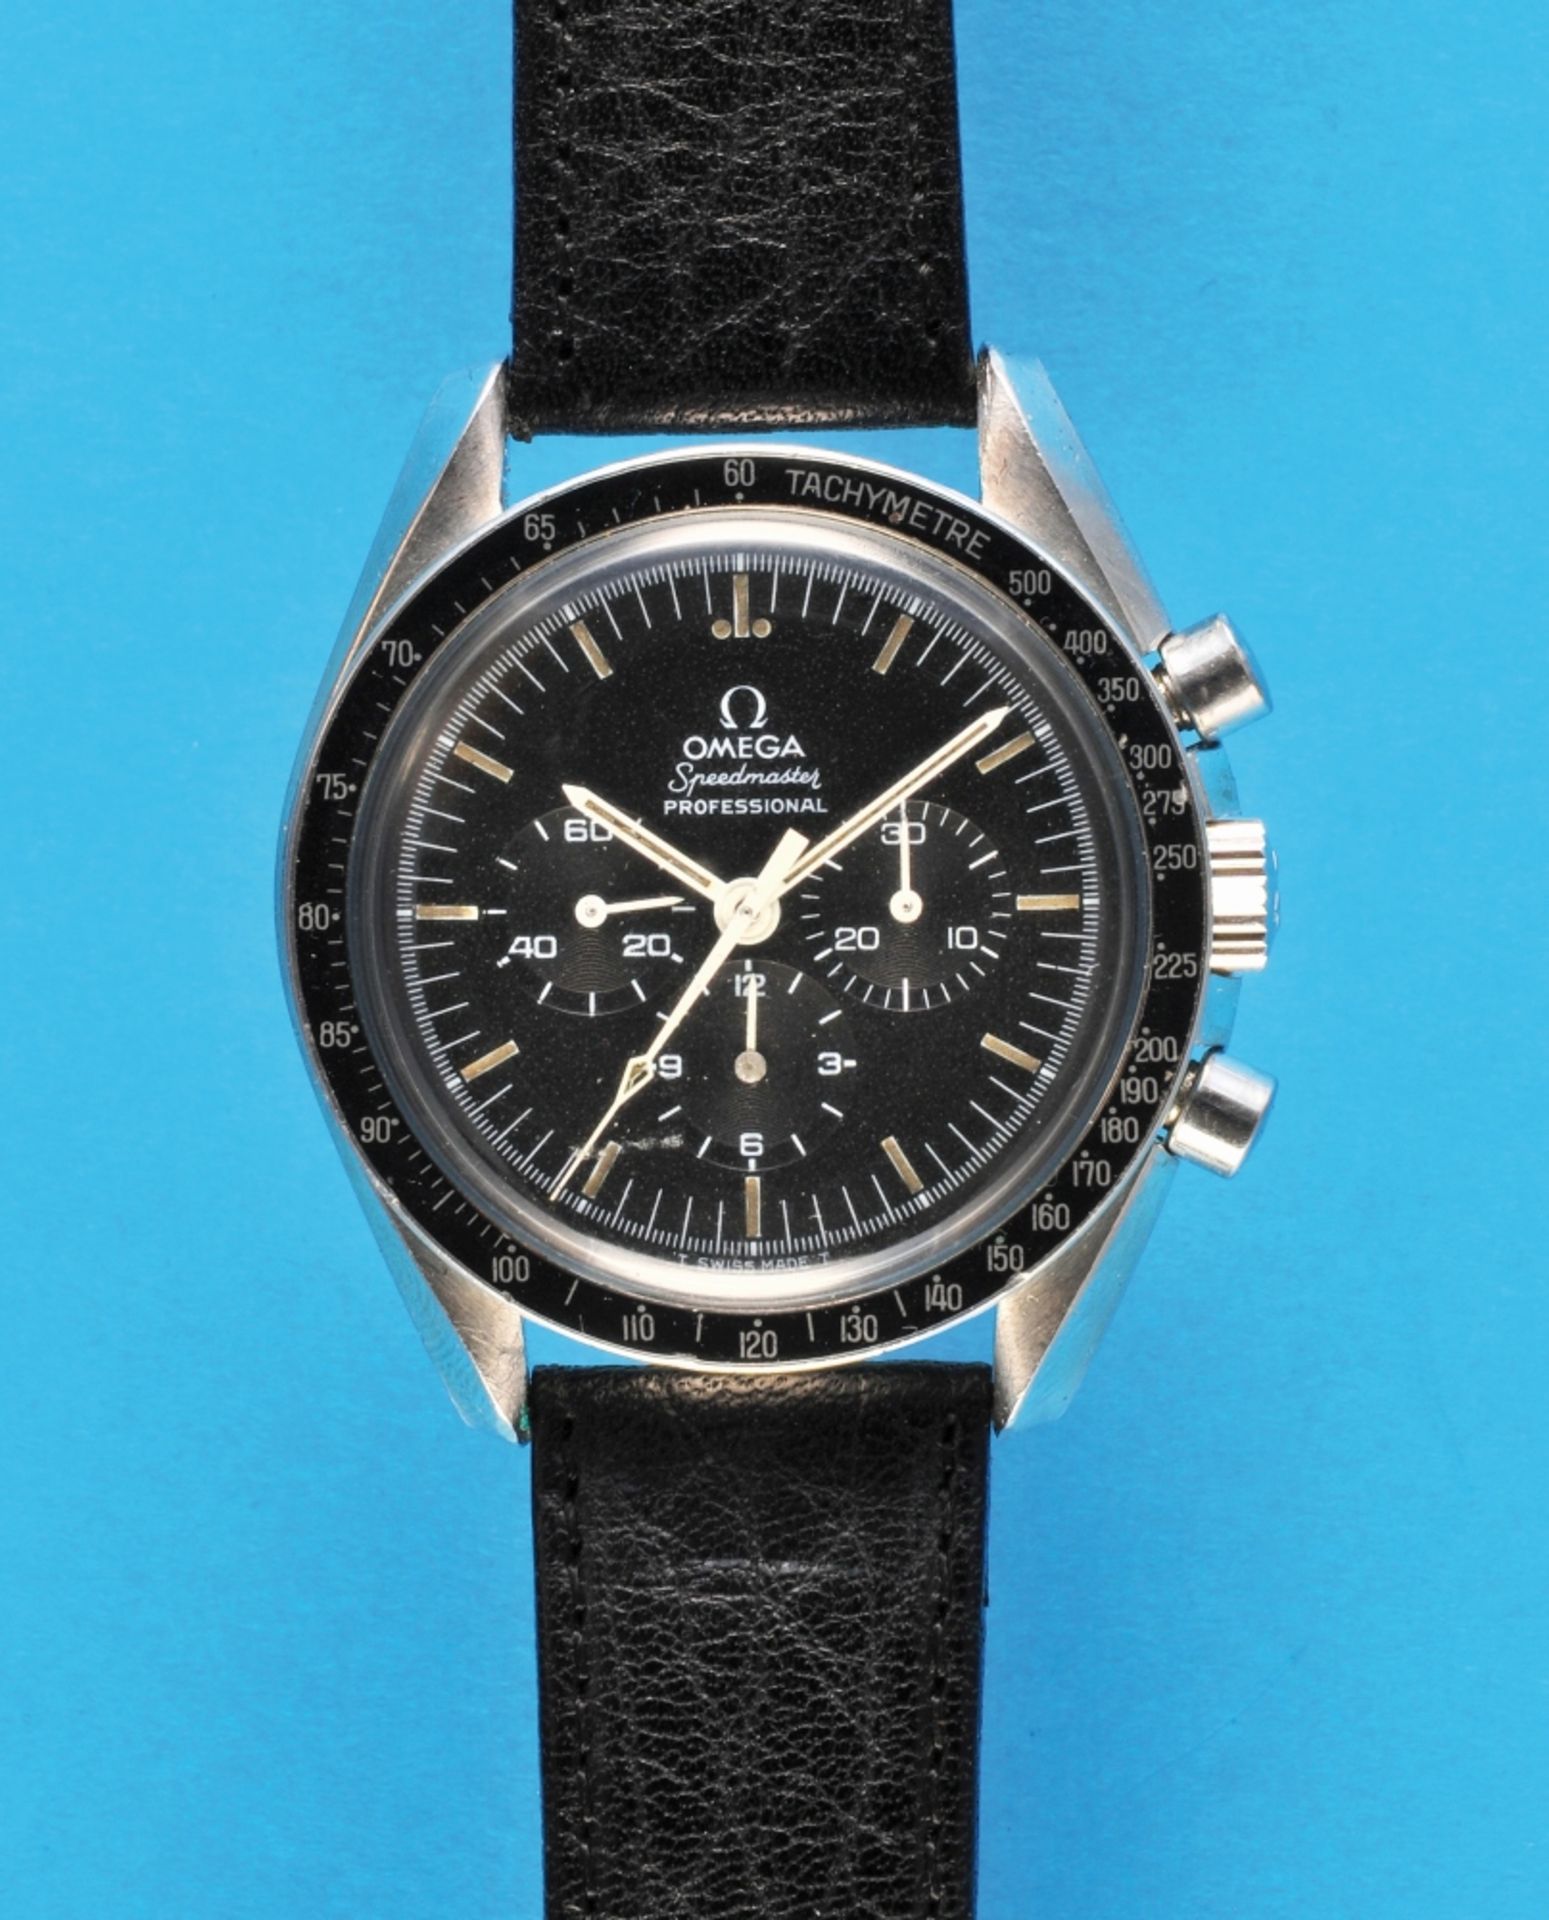 Omega Speedmaster Professional Moon steel wristwatch with chronograph, 30-minute counter and 12-hour